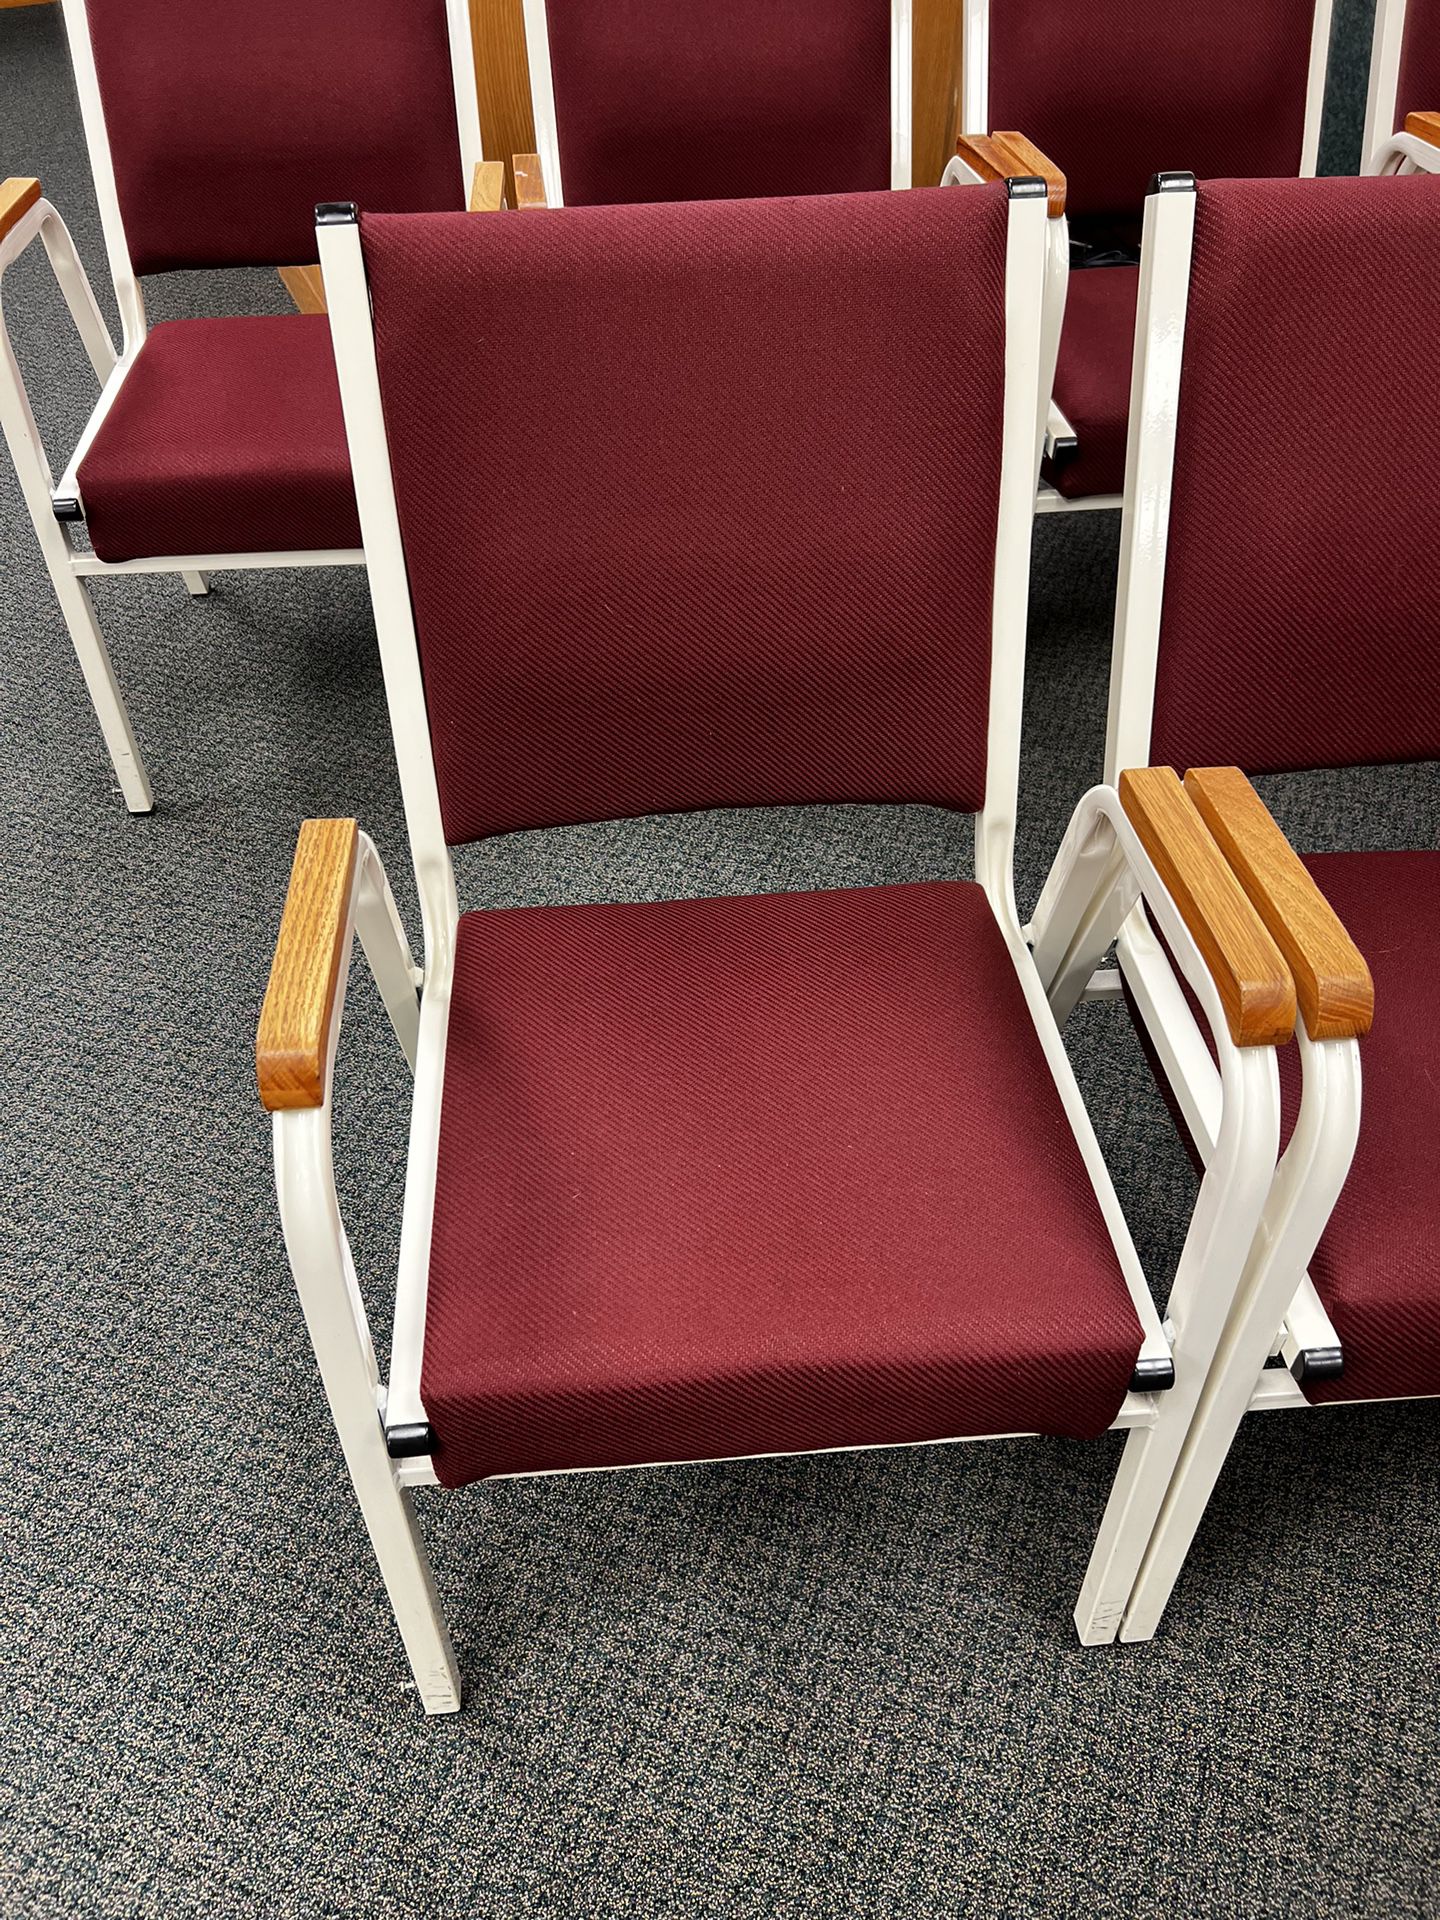 Meeting chairs 